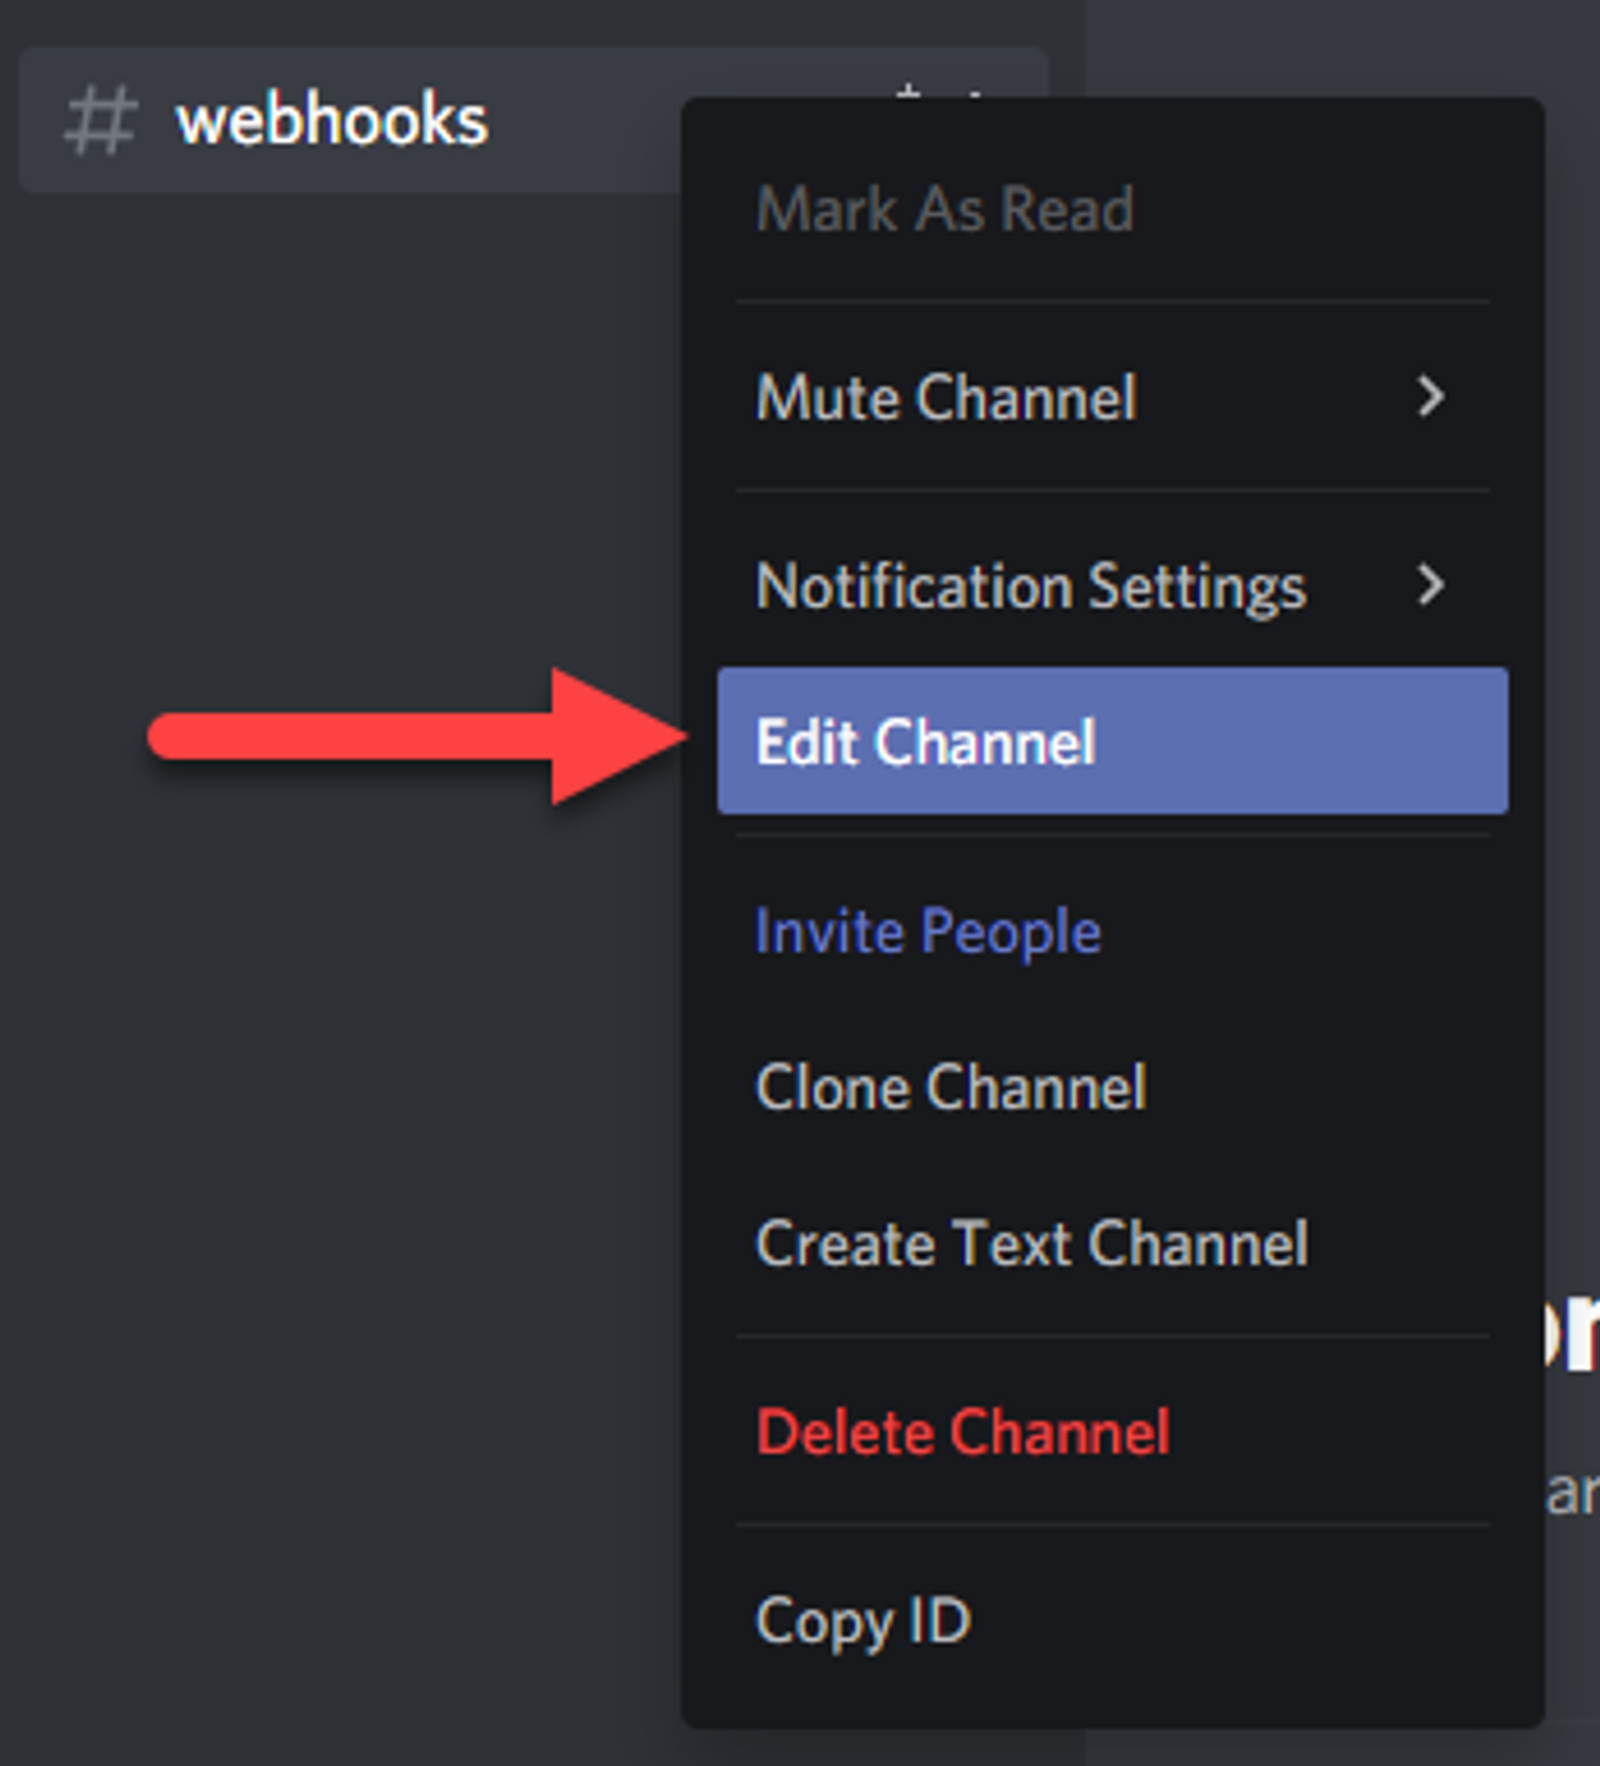 Webhook Service, A simple way to send information to Discord